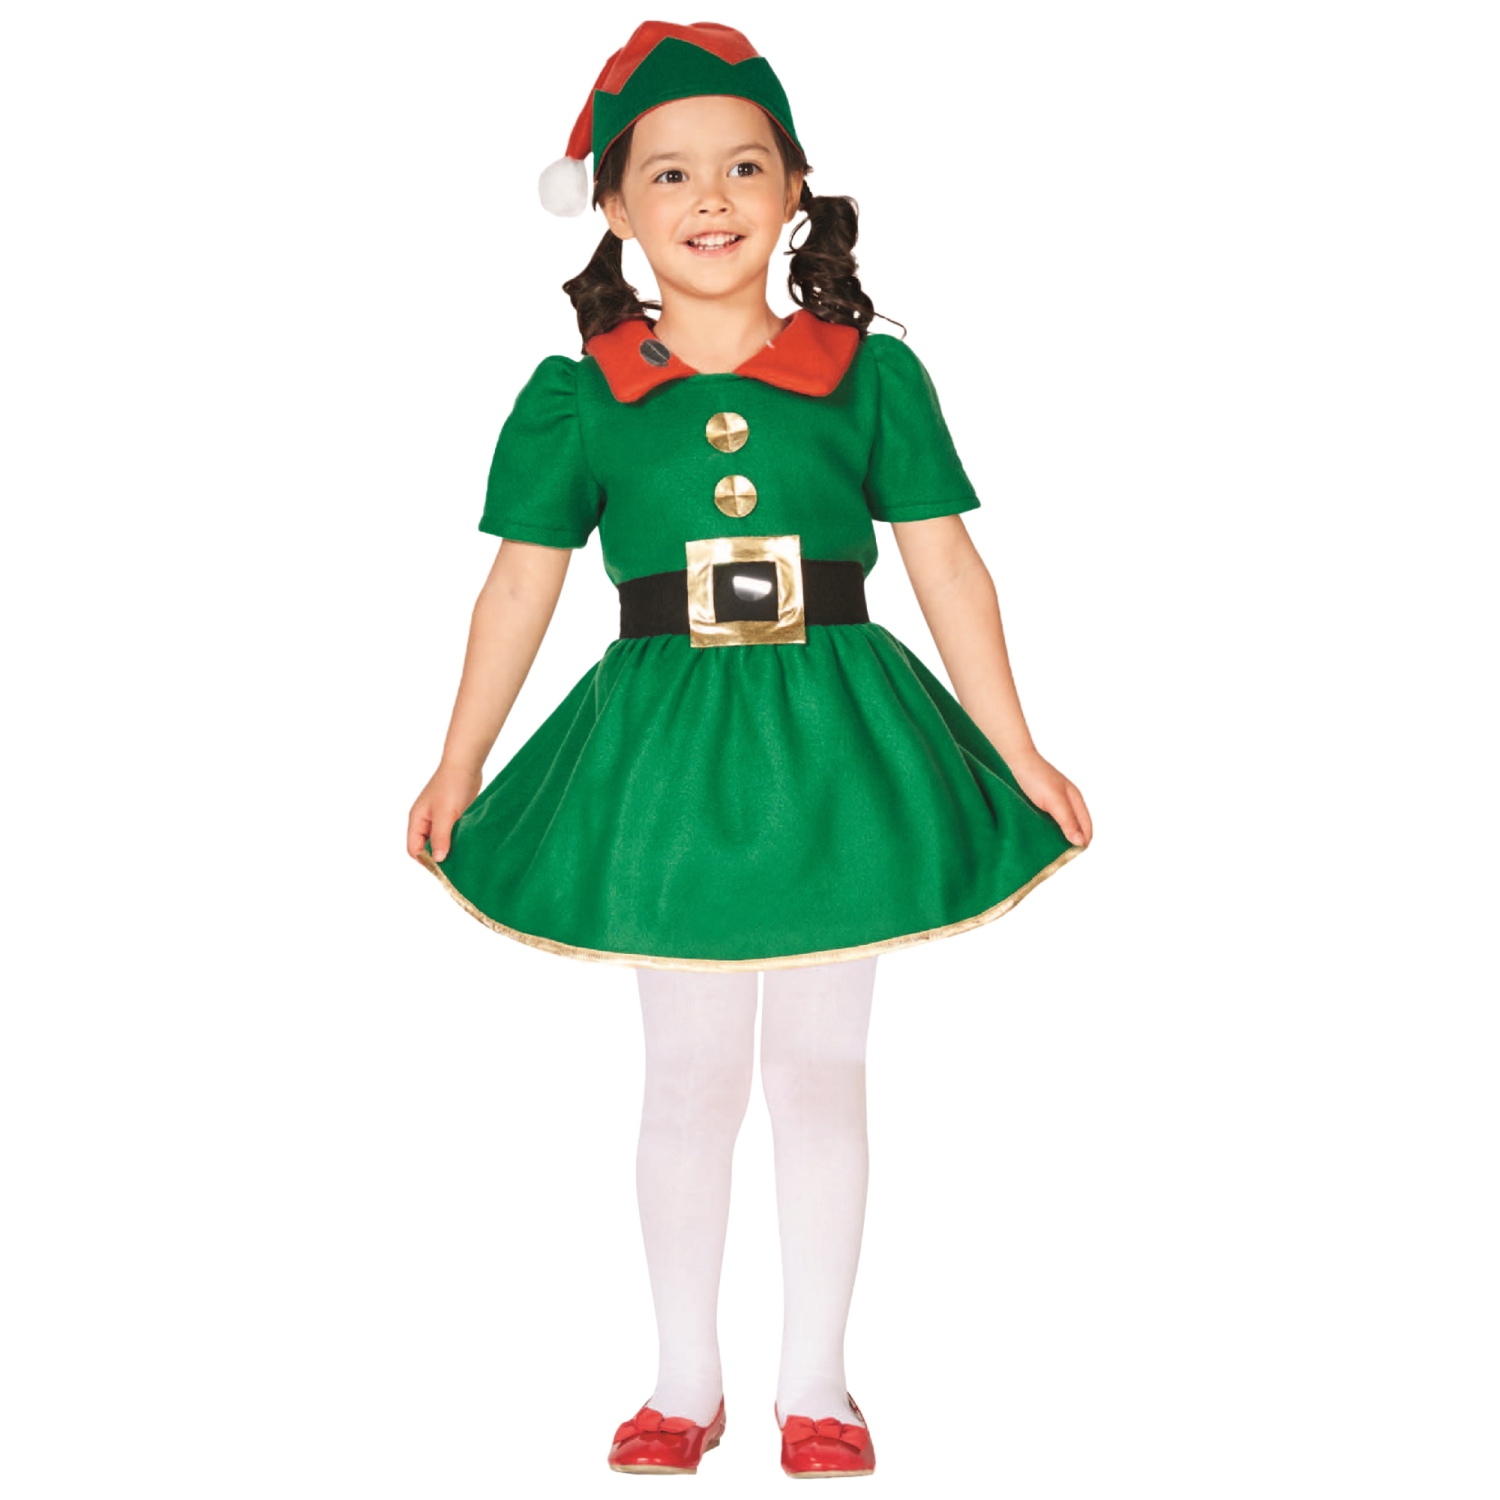 28" Green and Red Girl's Elf Christmas Costume - 6-8 Years